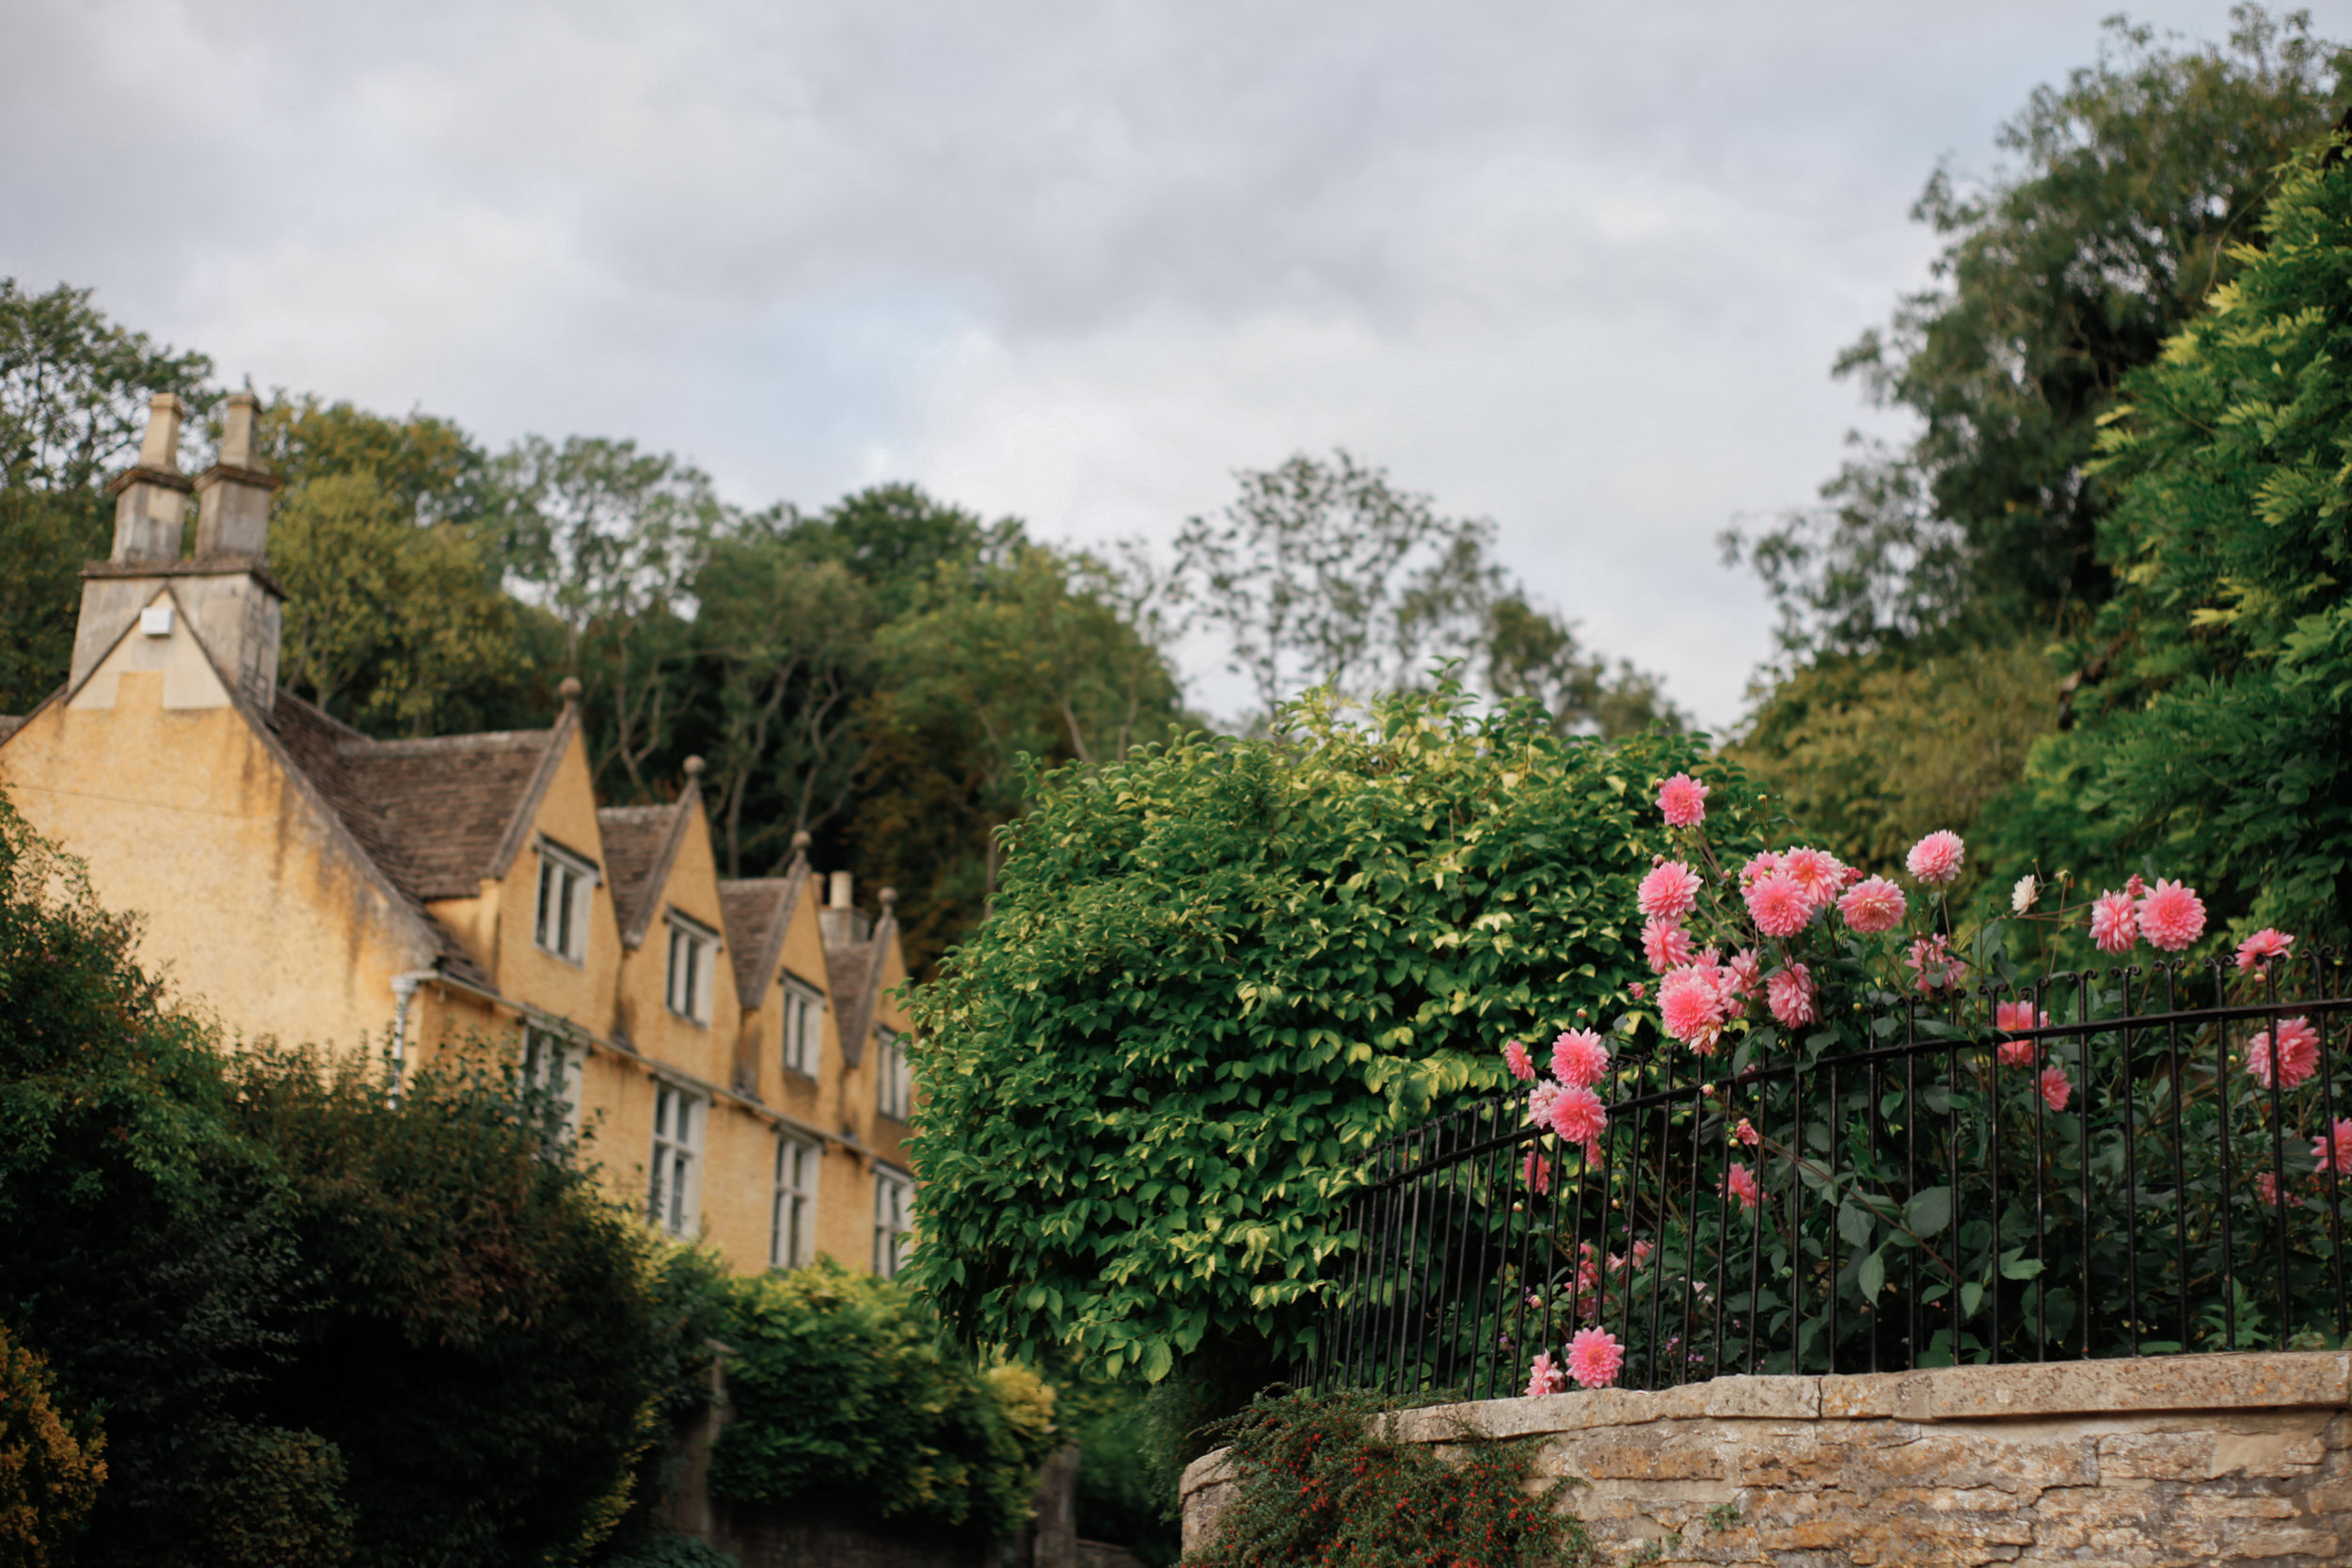 day_three_cotswolds (132 of 133).jpg